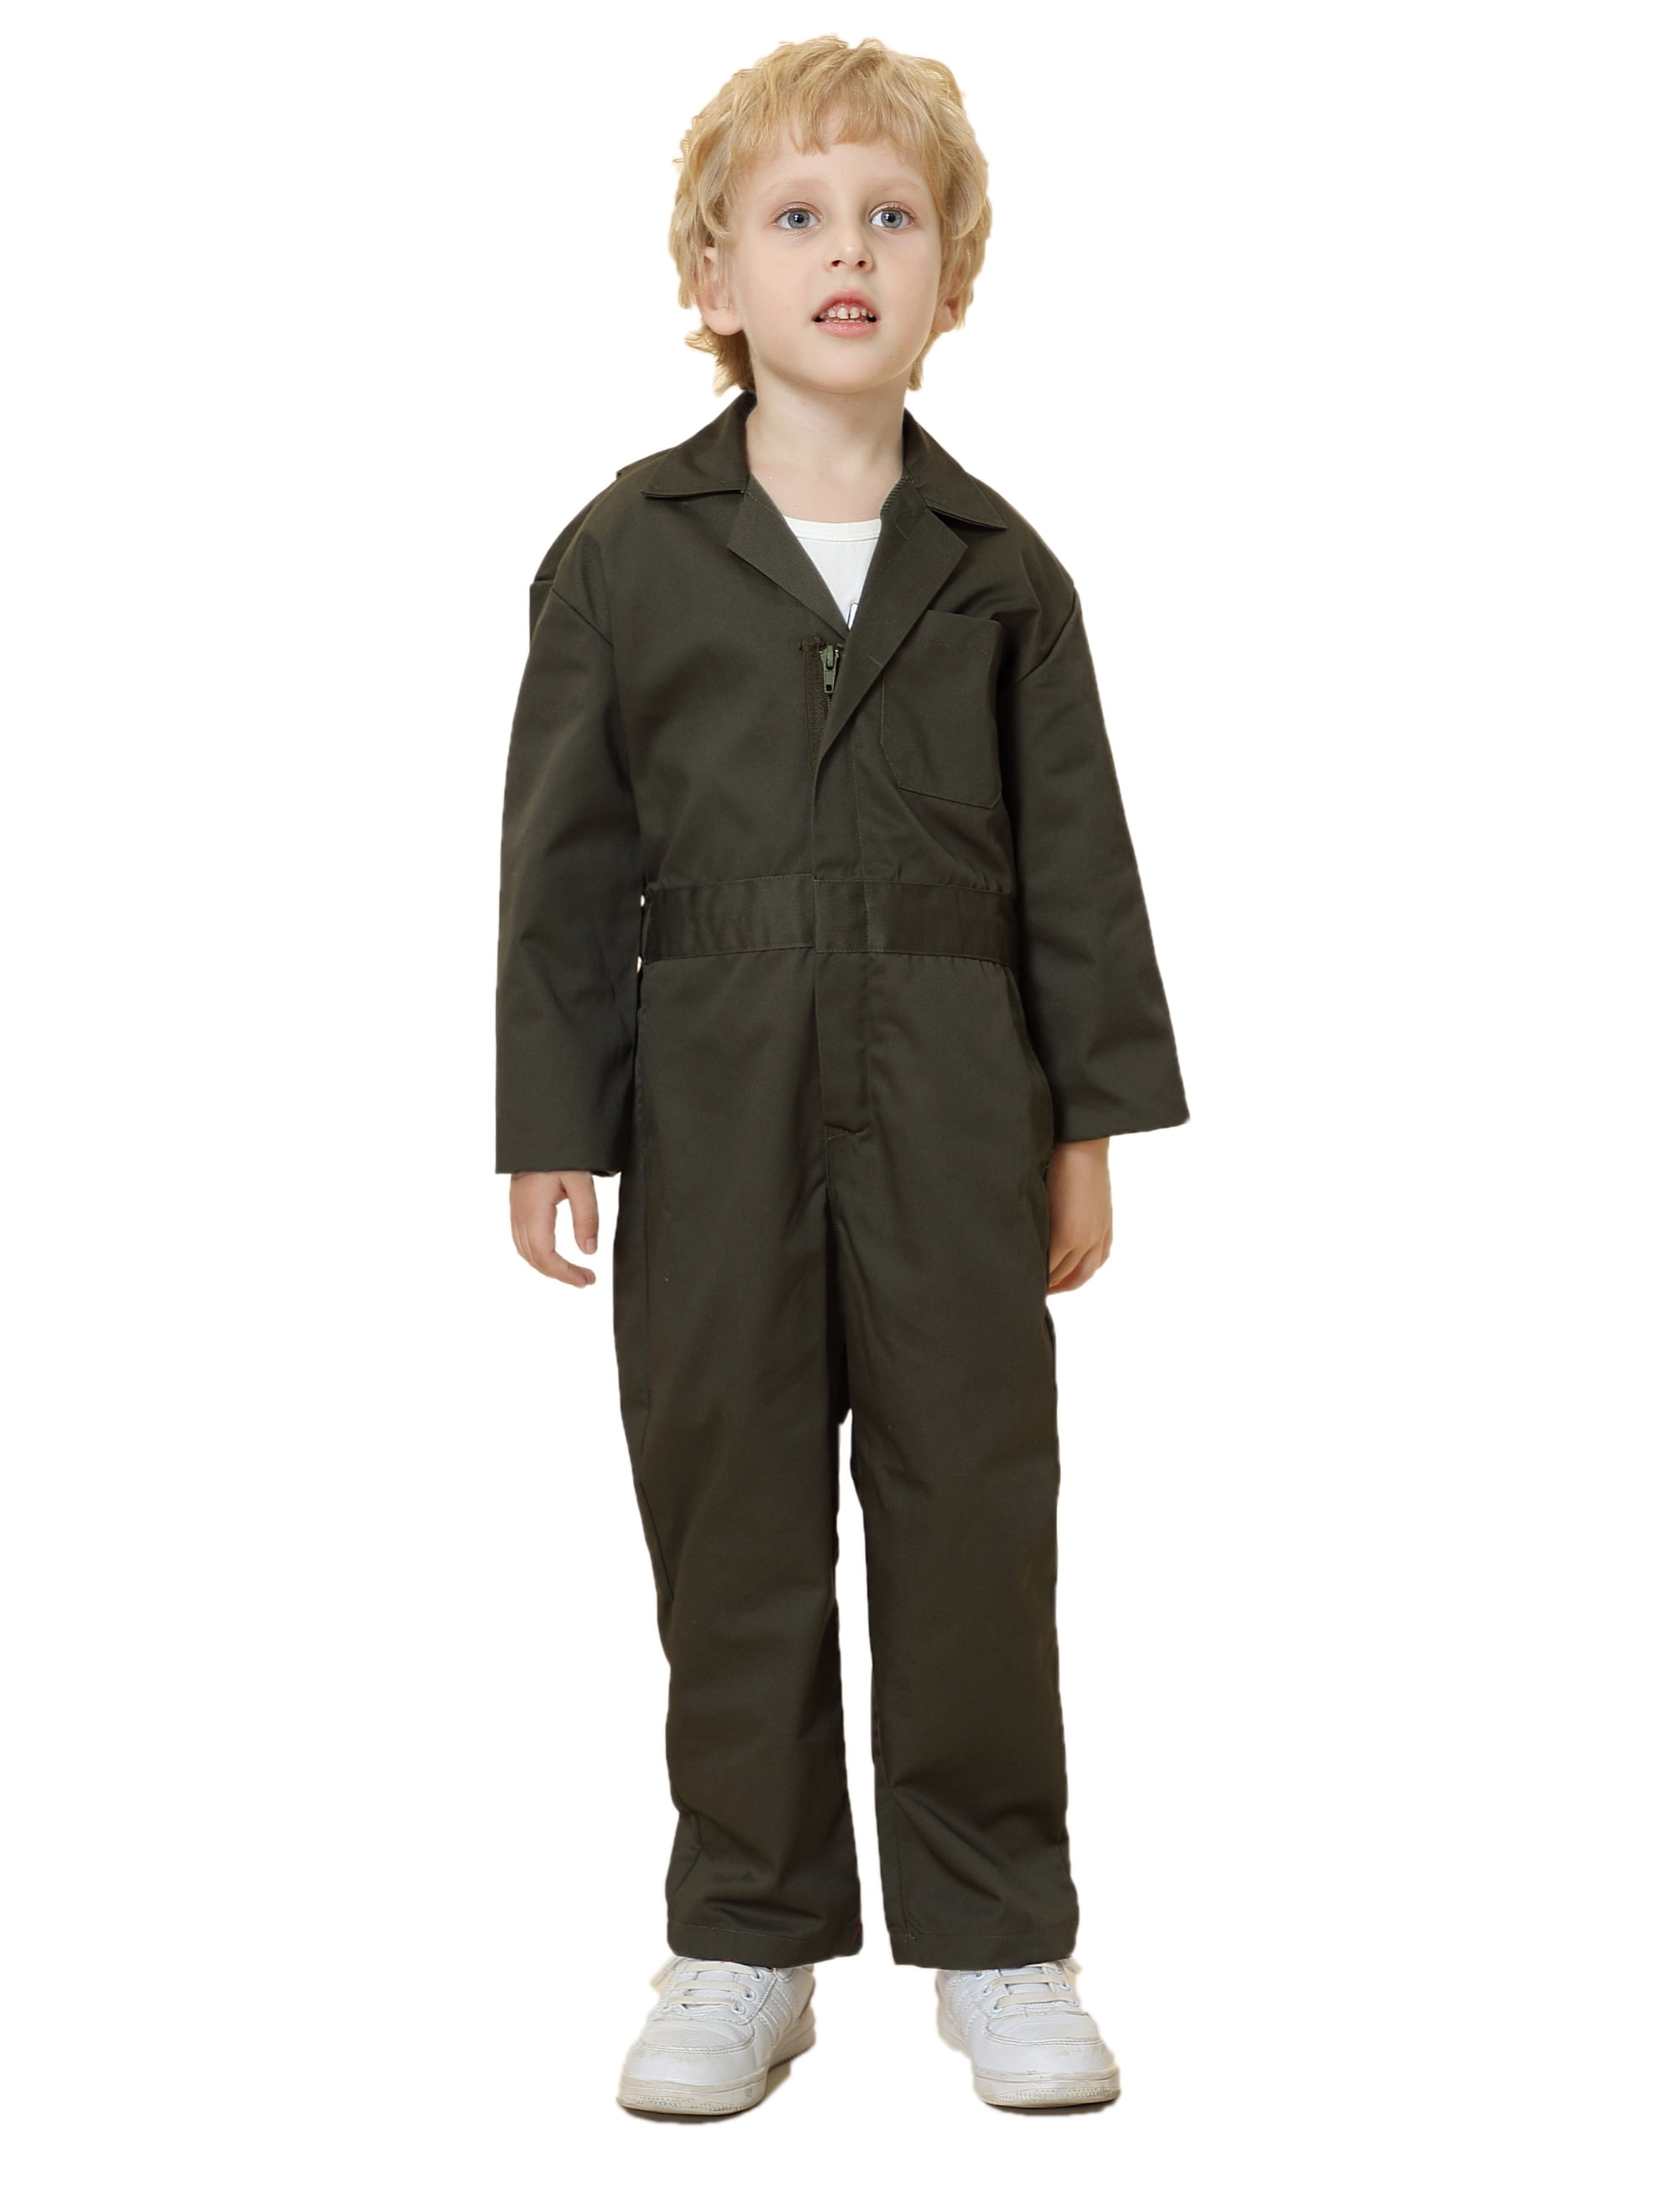 NEW KIDS OVERALLS BOILERSUIT CHILDRENS BOYS GIRLS  COVERALL BOILER SUIT COSTUME 